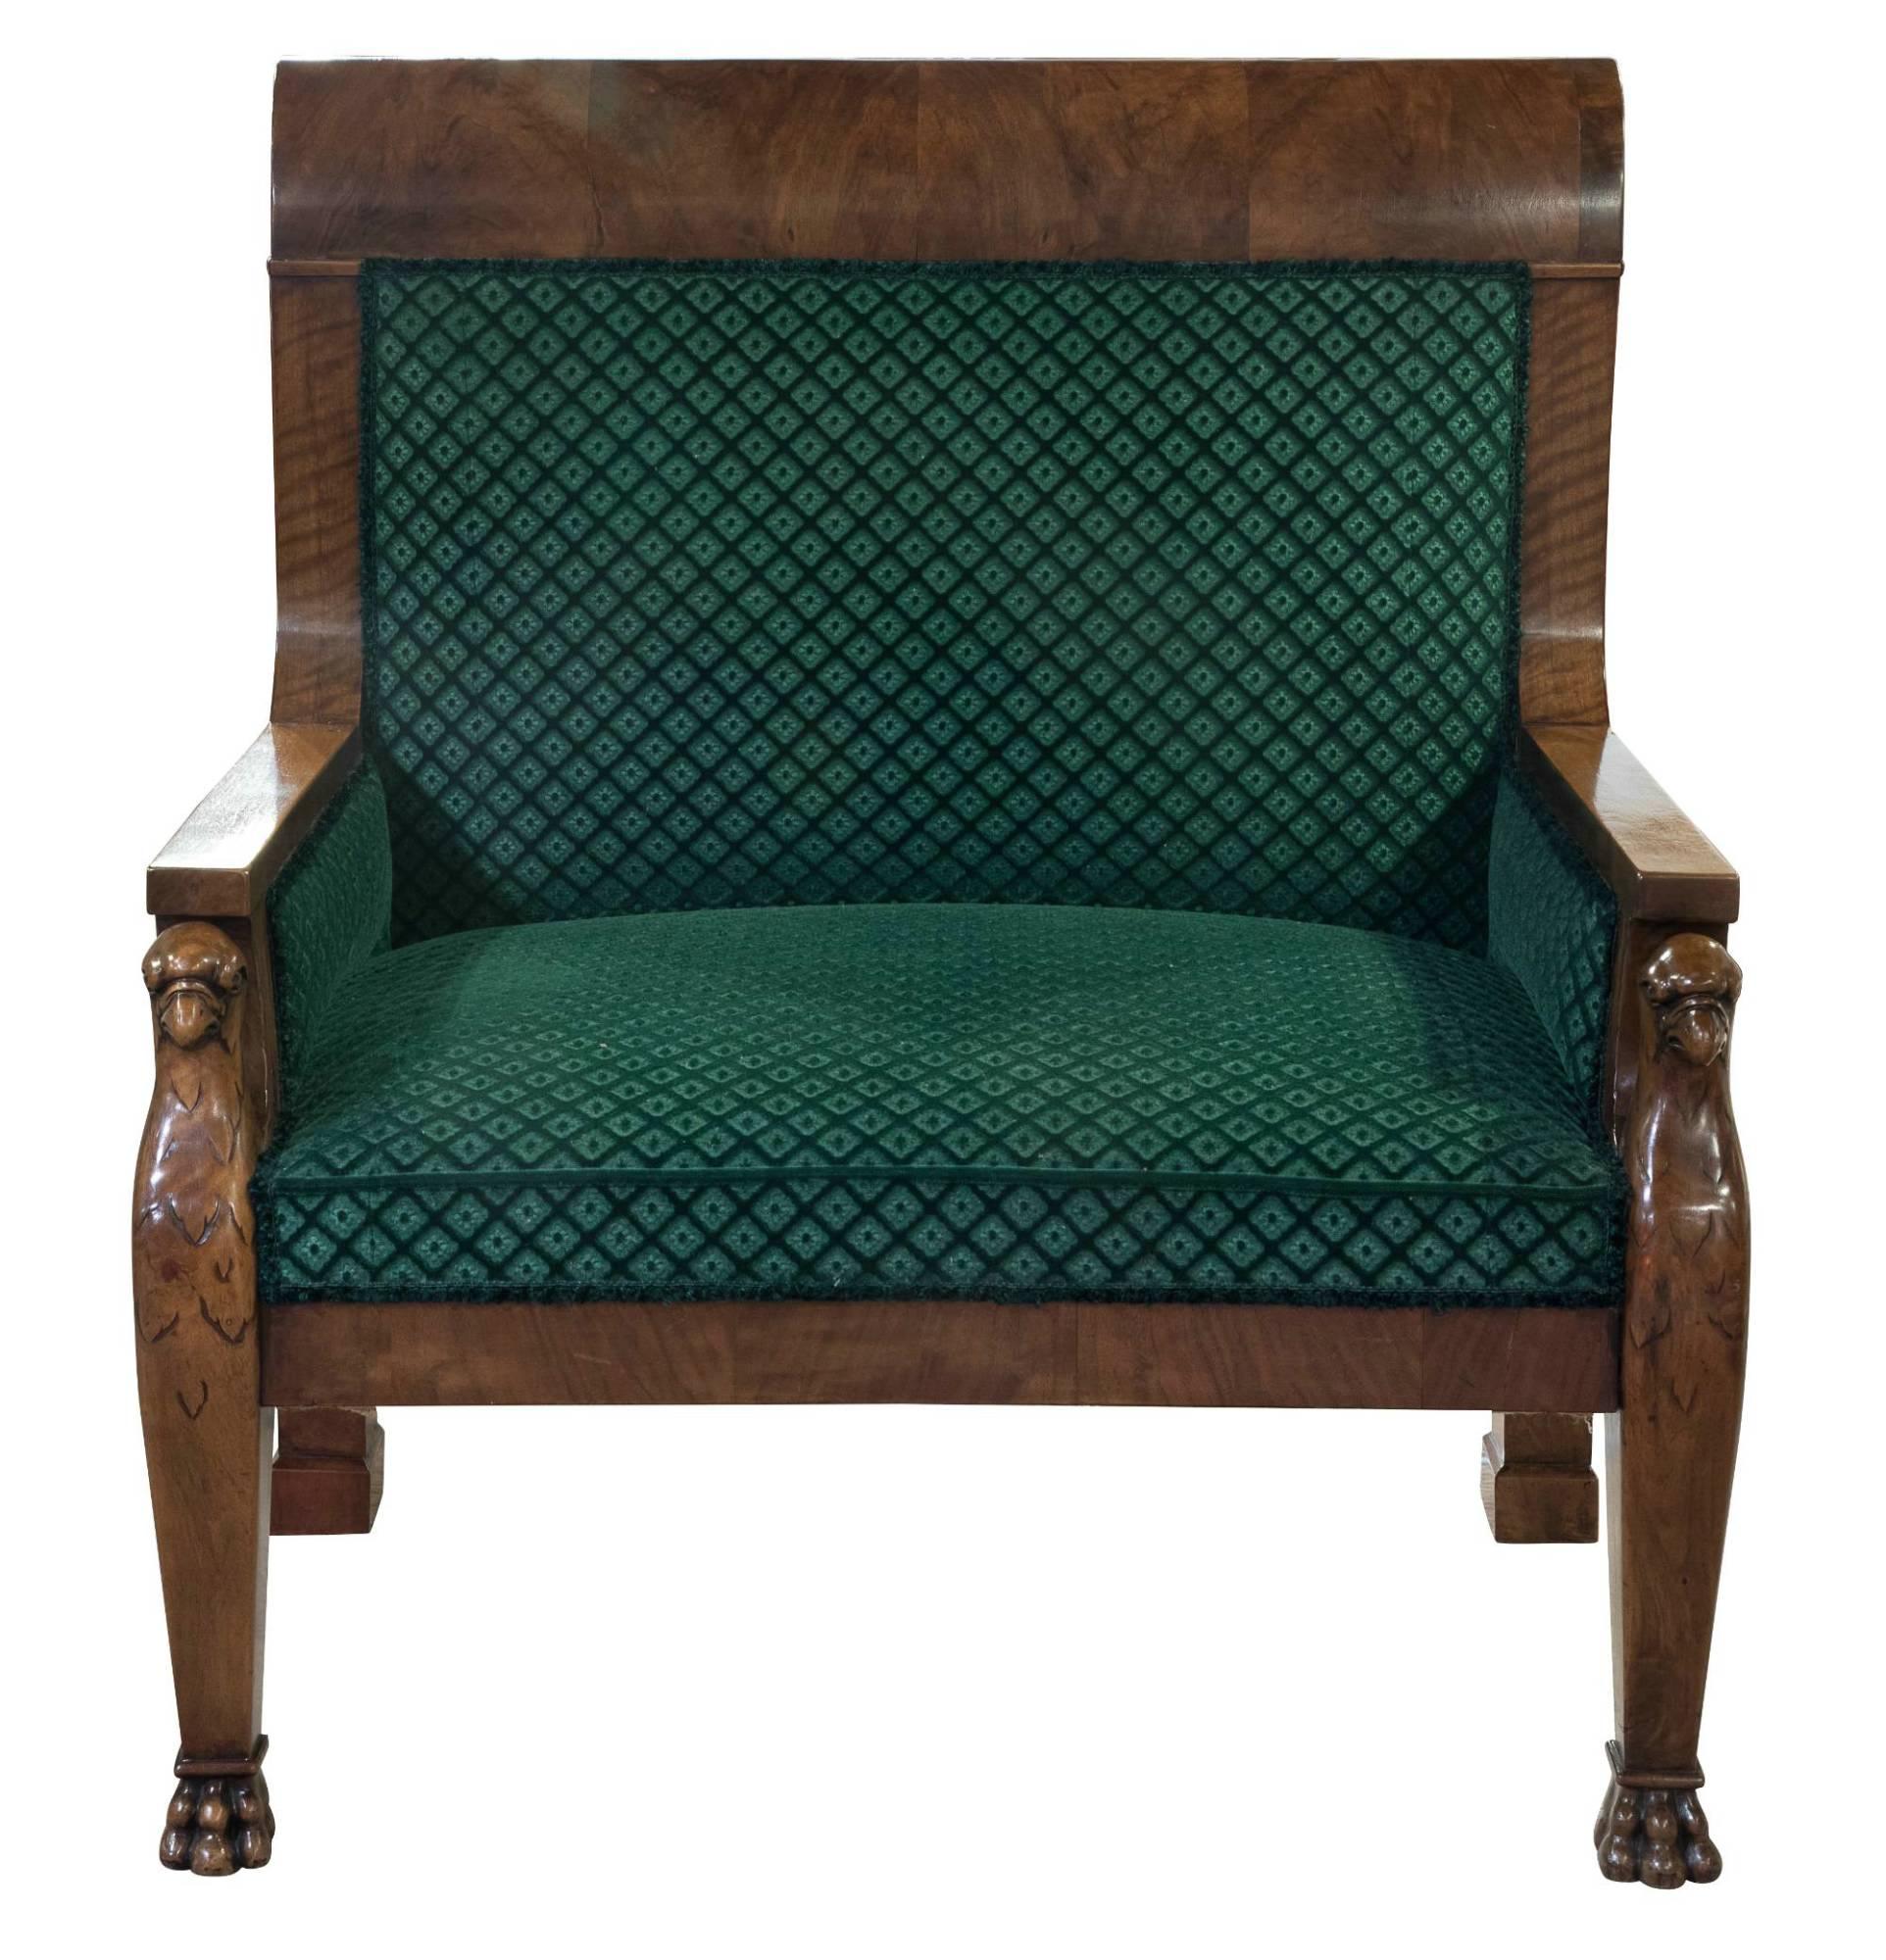 An unusual large French mahogany chair with carved griffen arm supports,

circa 1880.